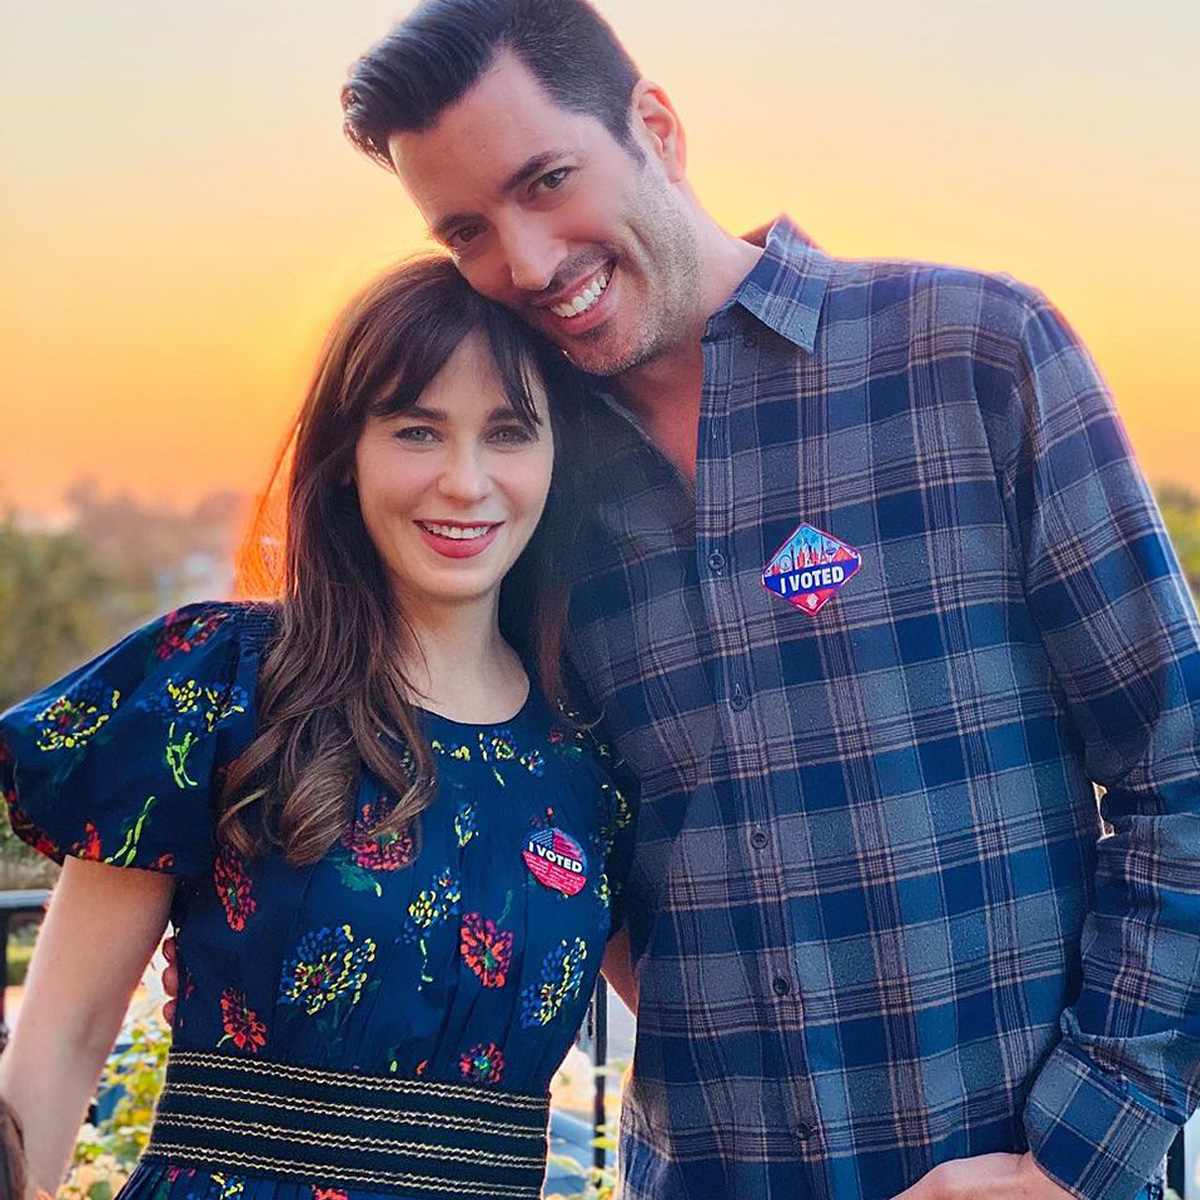 Why Zooey Deschanel and Jonathan Scott Don't Have a Wedding Date Yet